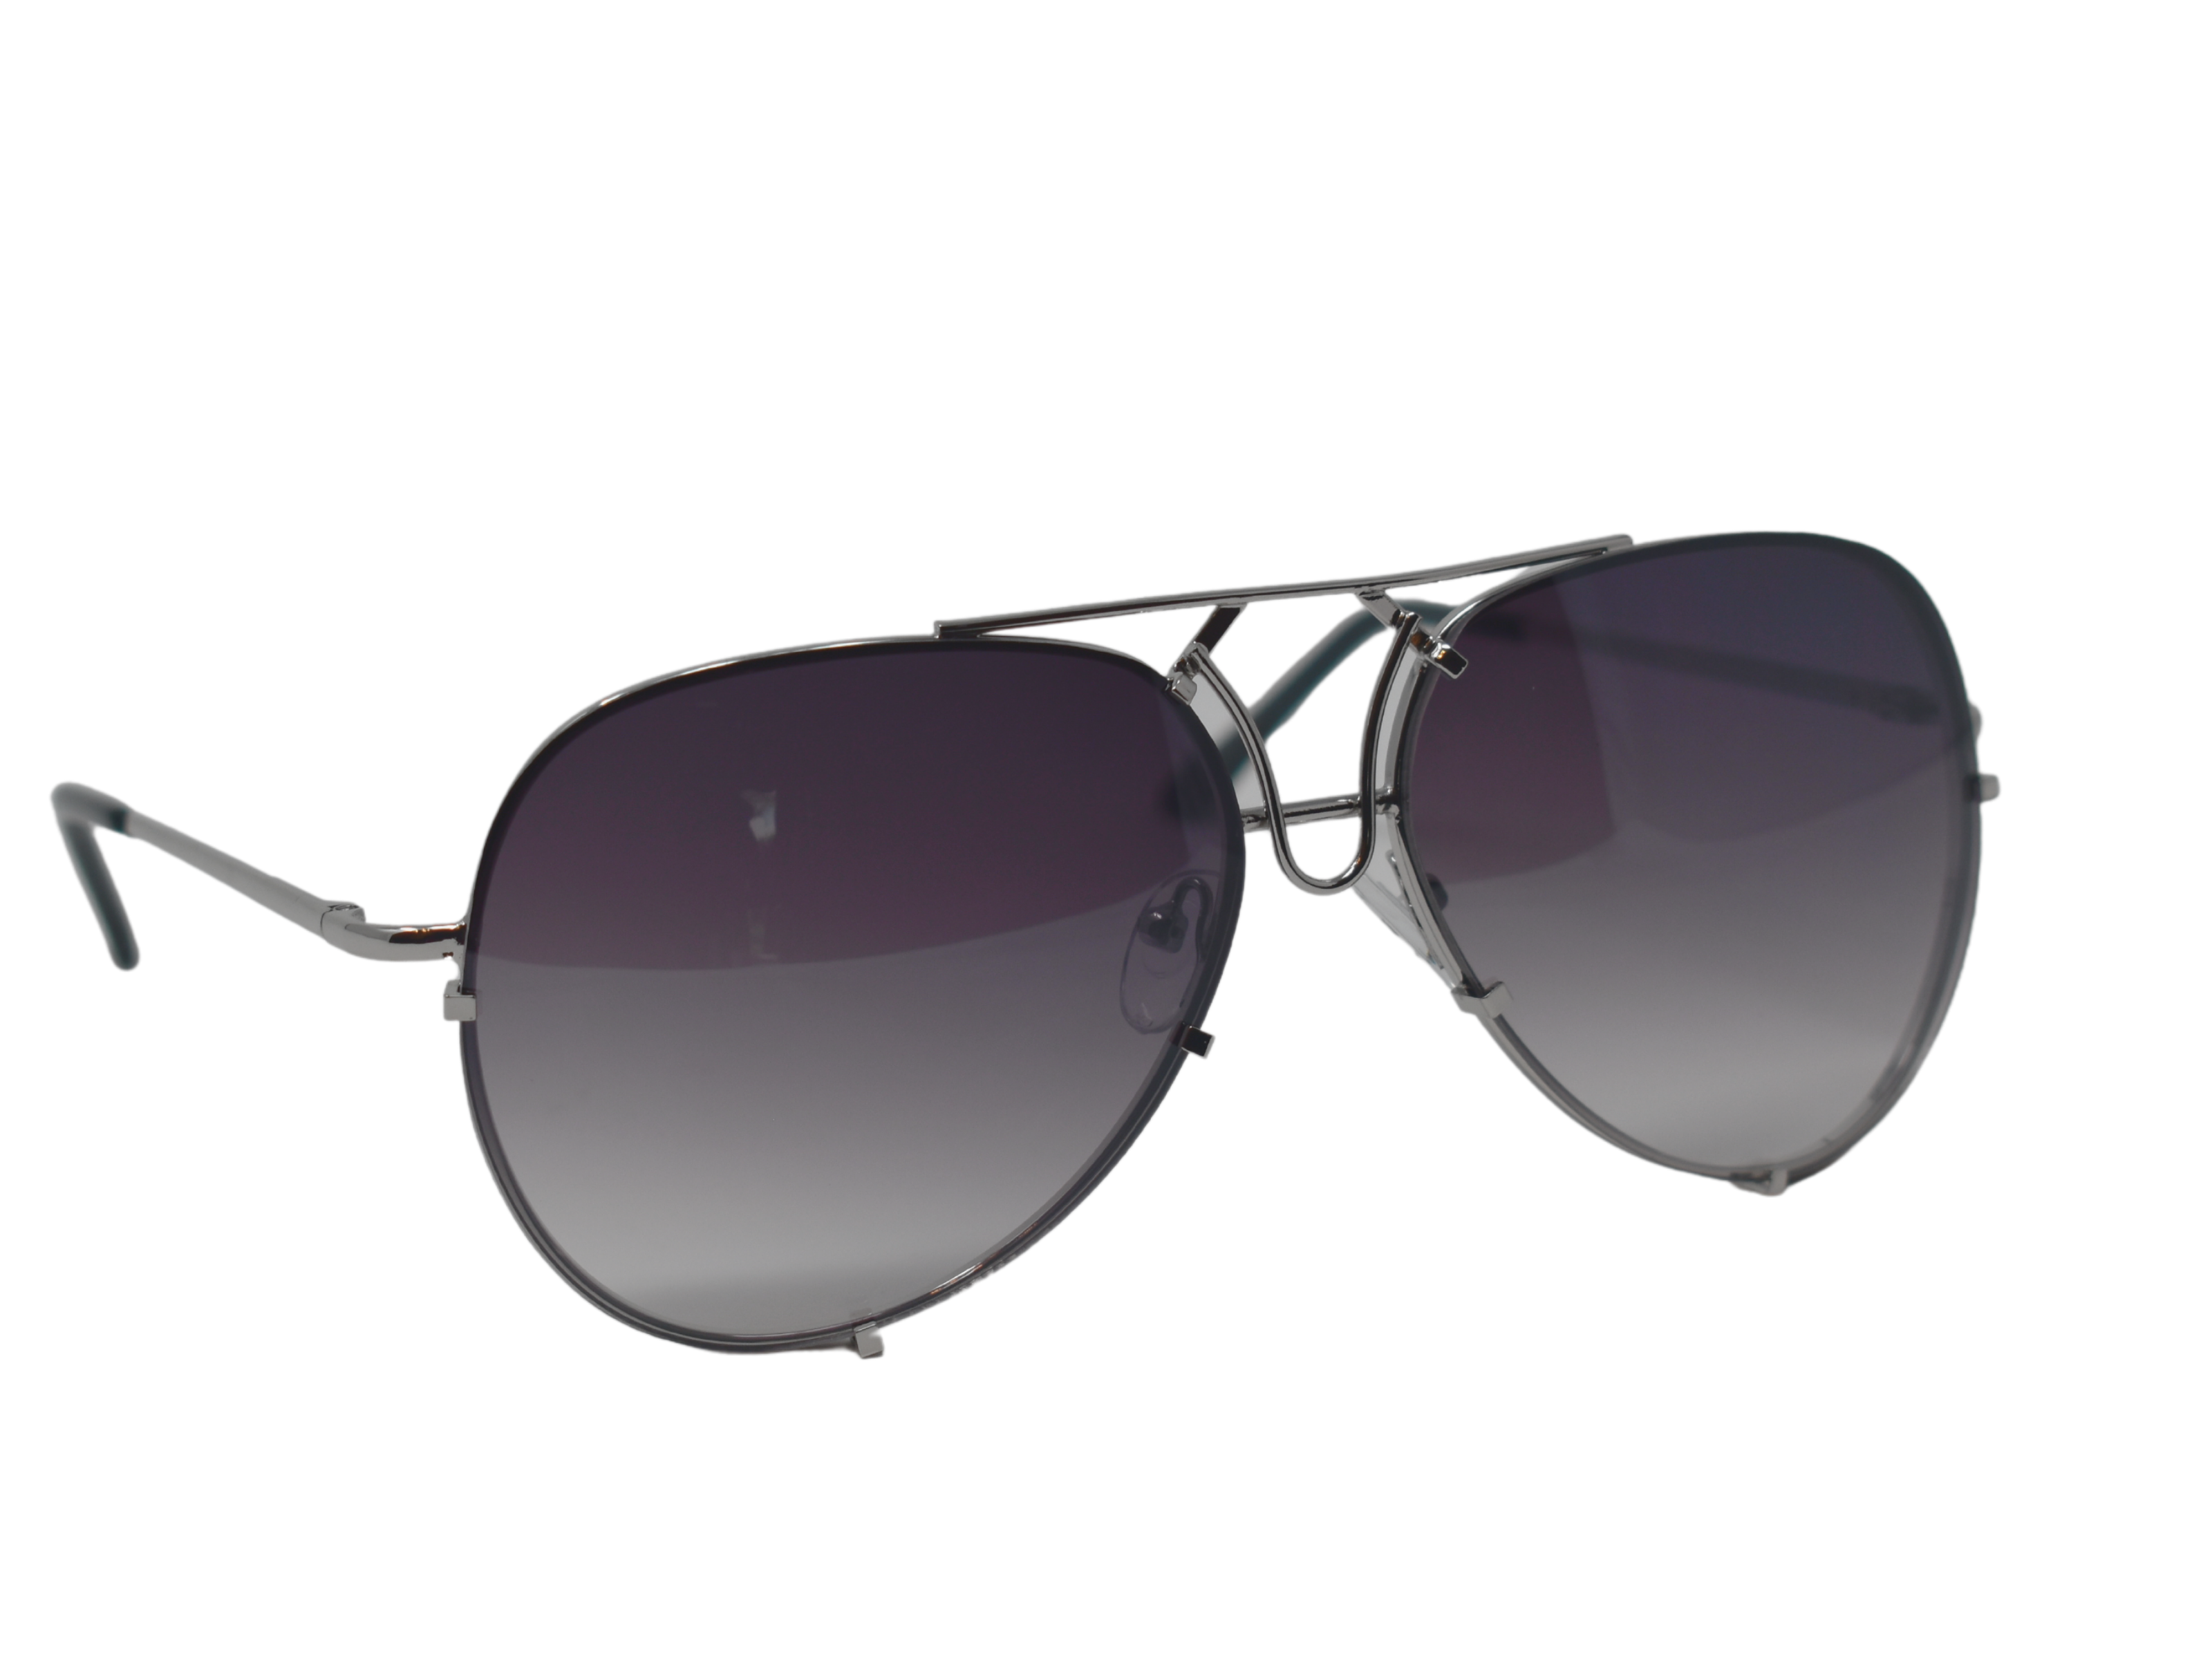 Make sure you indulge in our brilliant Viburnum Black Lens aviator style glasses with a silver frame.